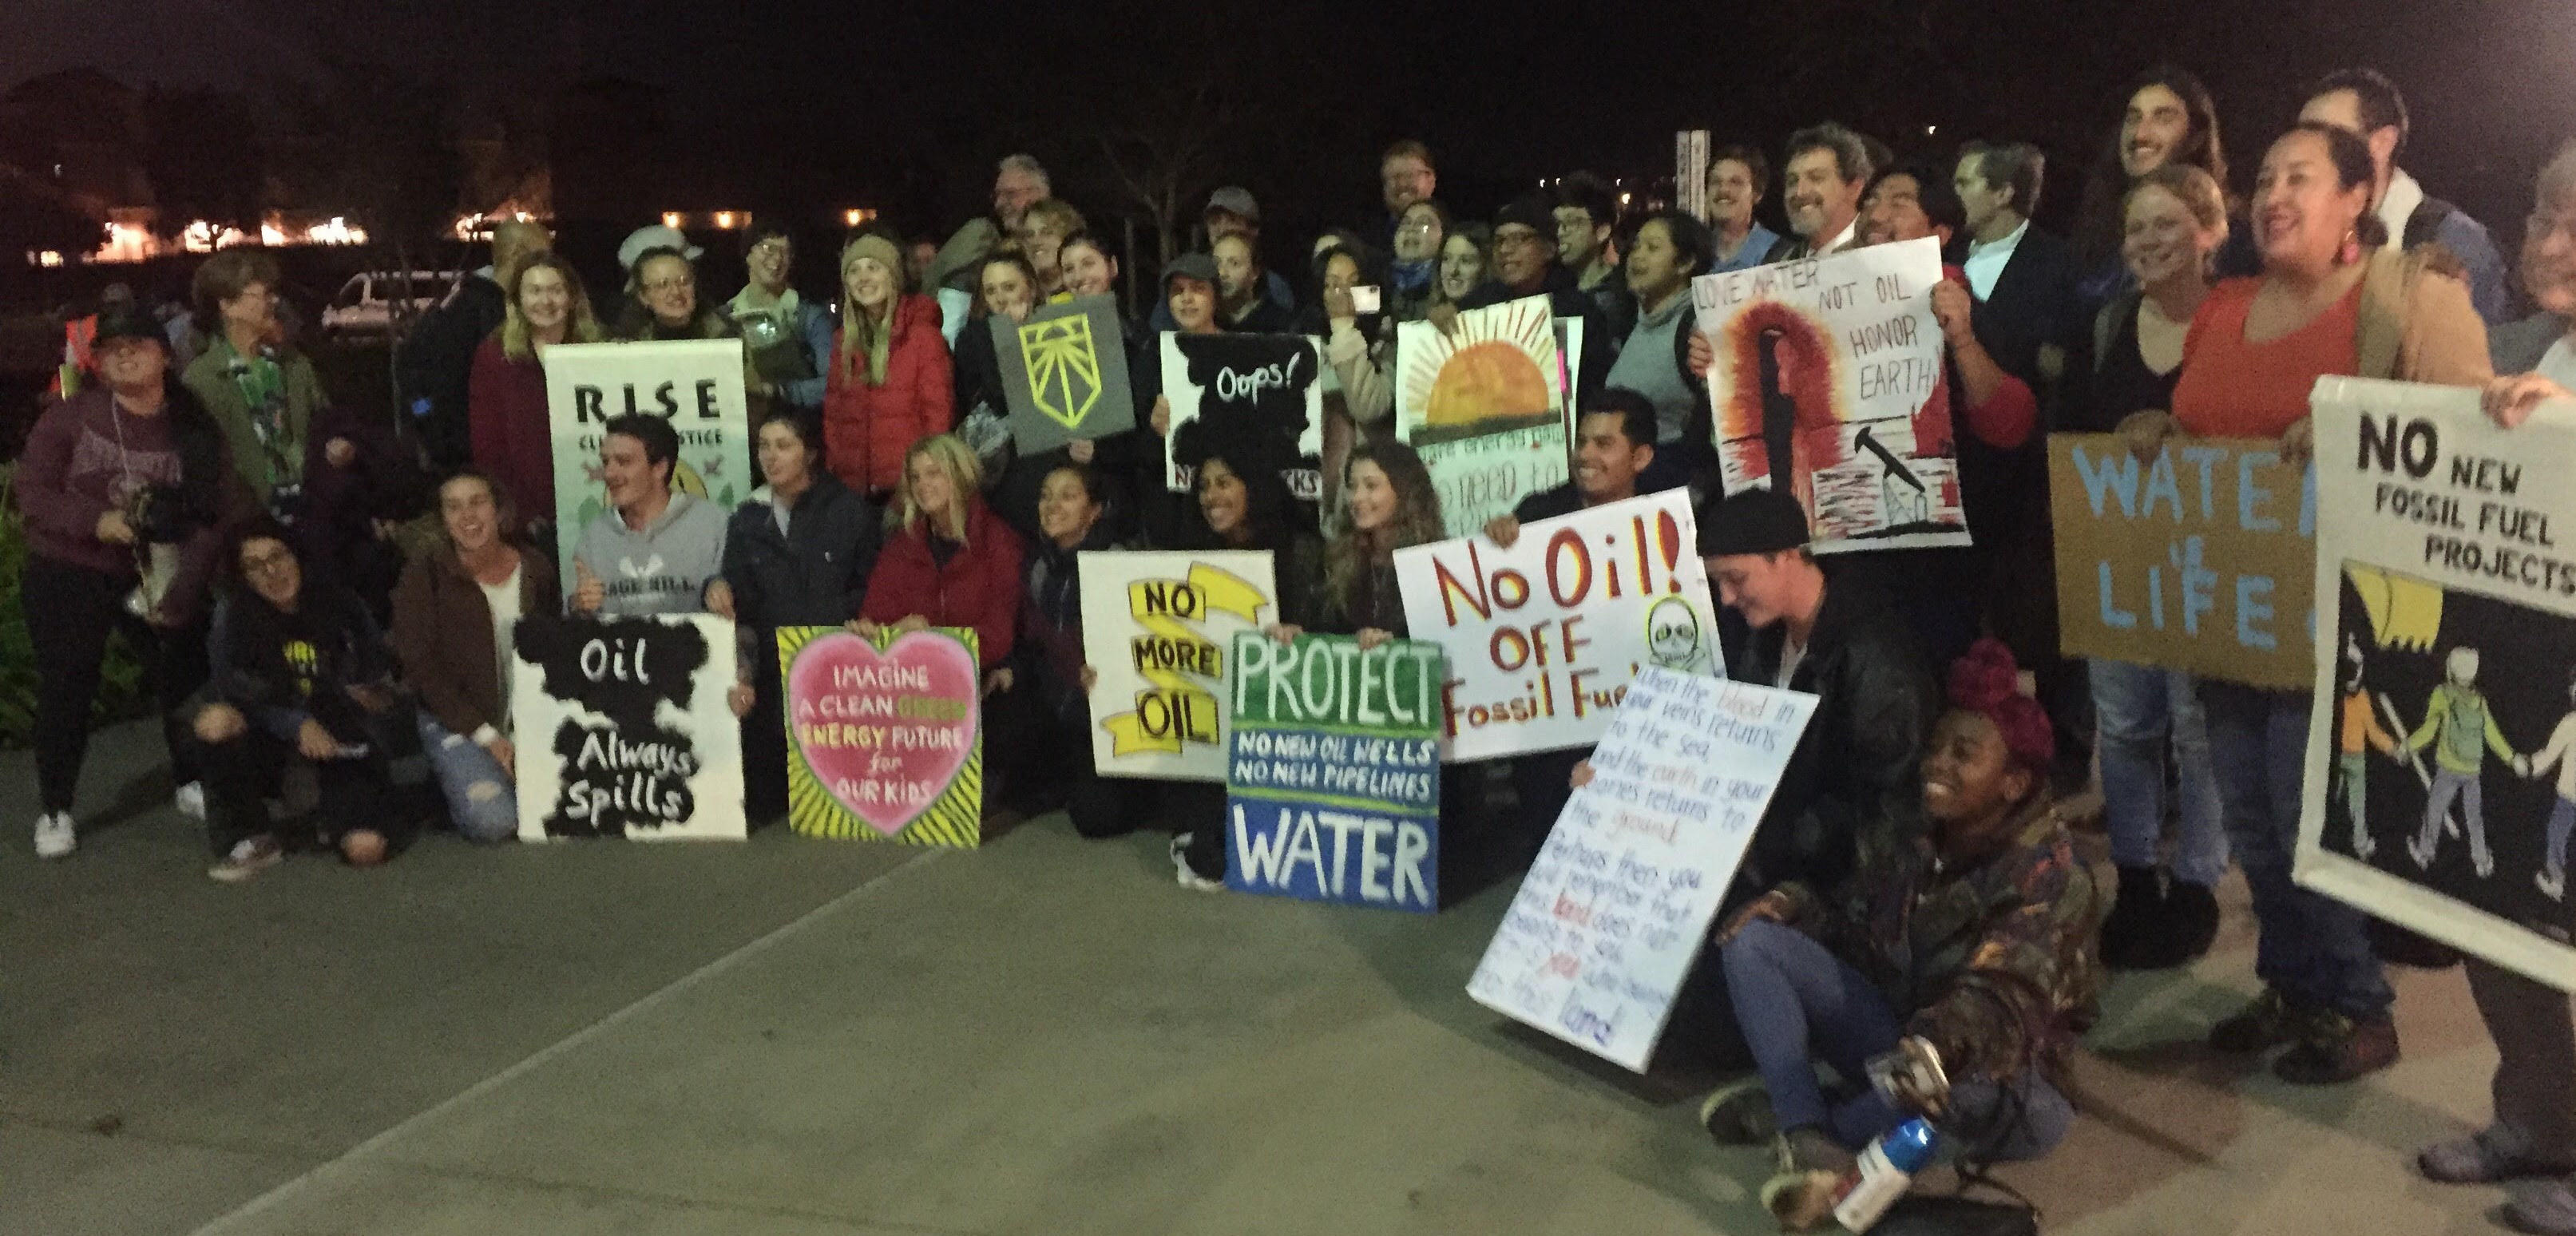 Protesters rally late into the night at oil hearing in Santa Maria